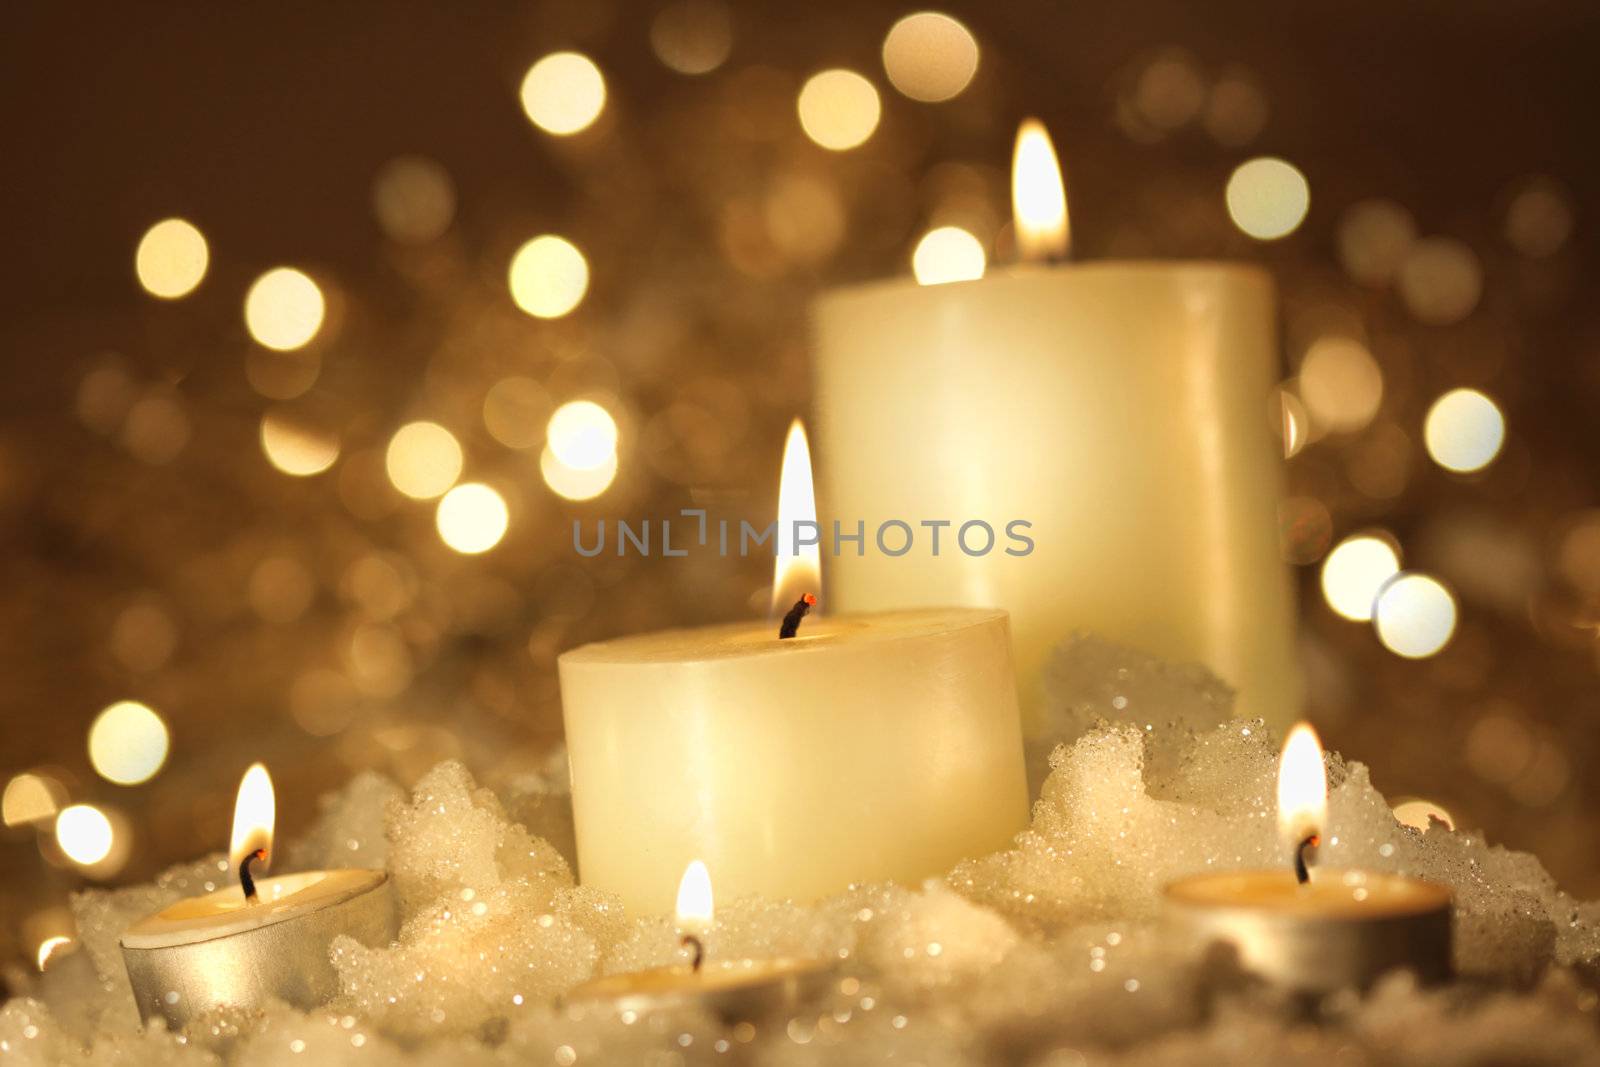 Brightly lit candles in wet snow against sparkly background